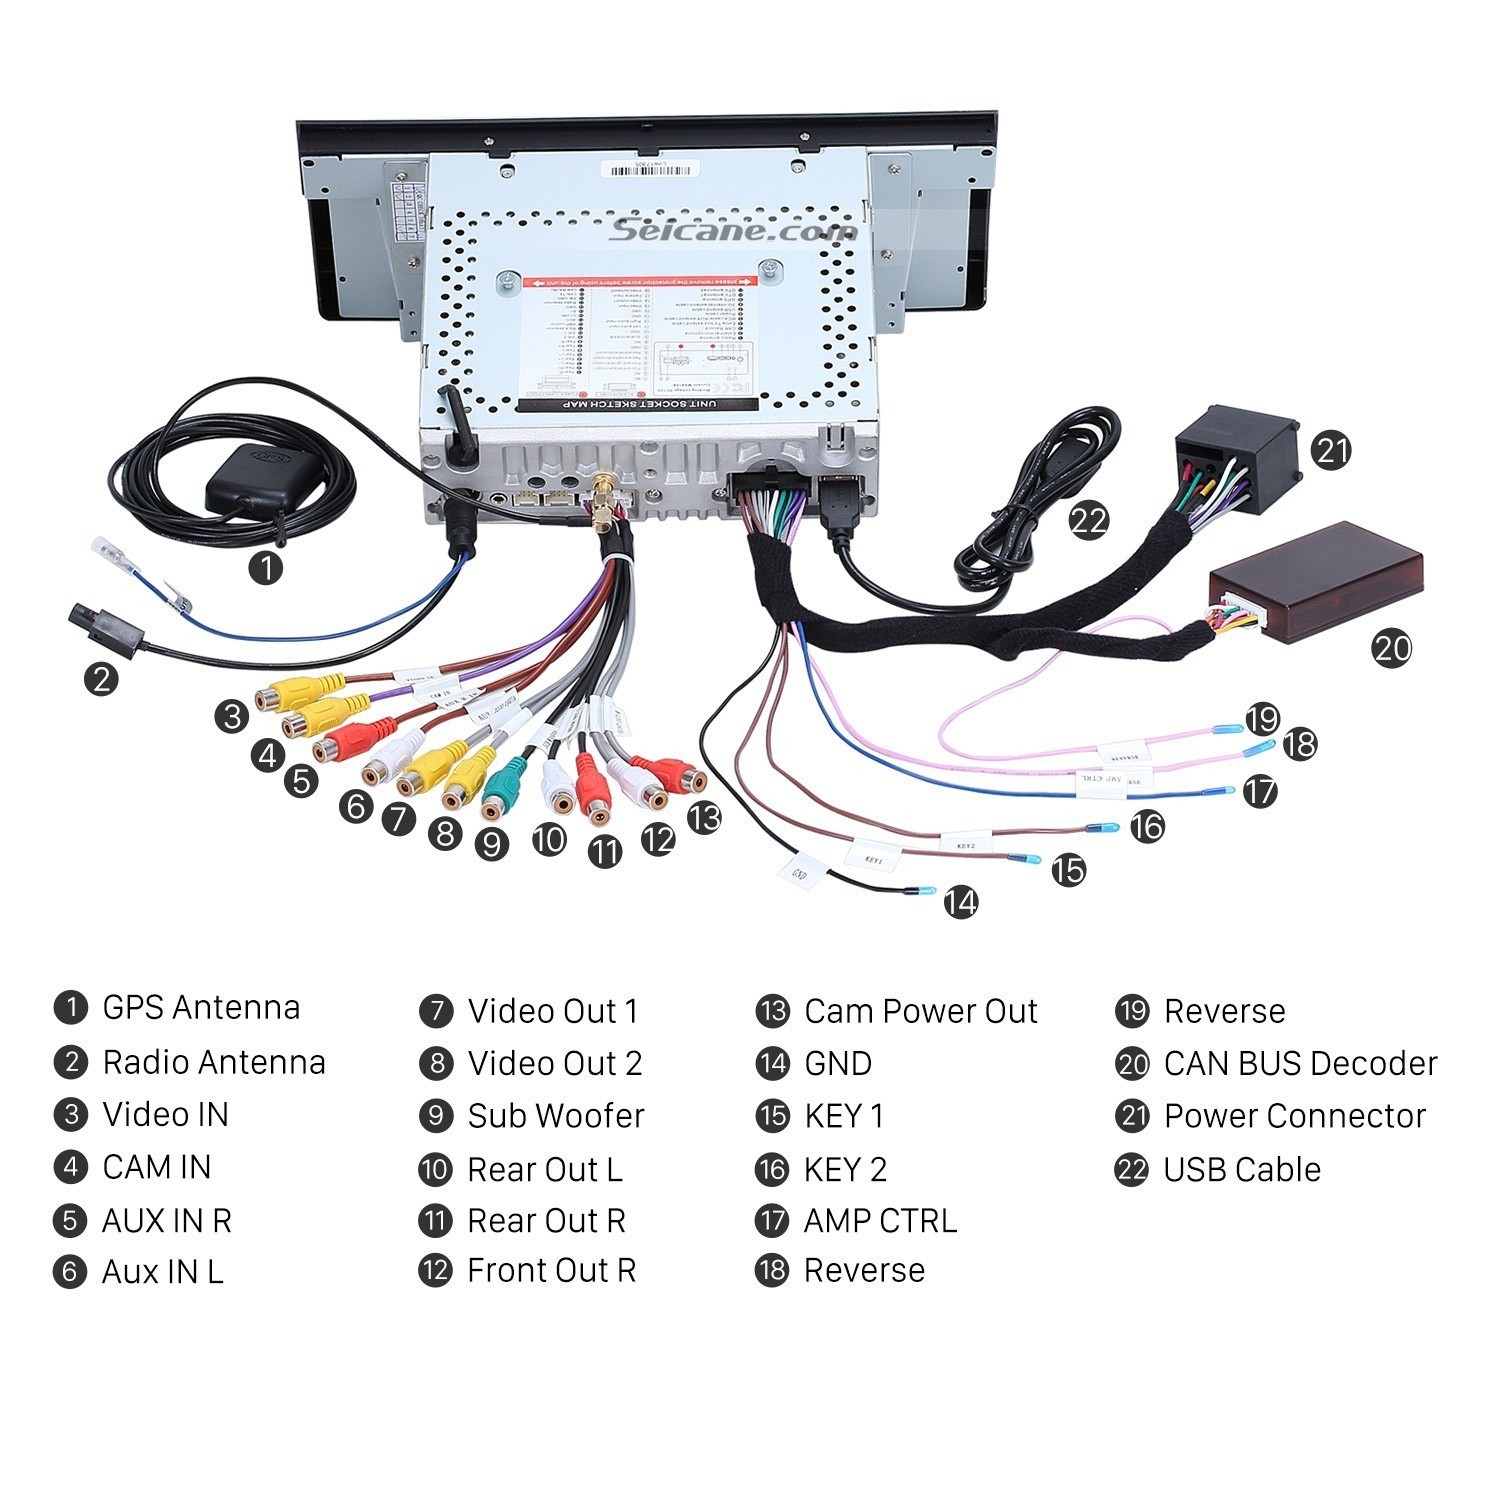 Wiring Diagram for Usb Charger Save Diagram Car Best Car Parts and Diagrams Insignia Se 2